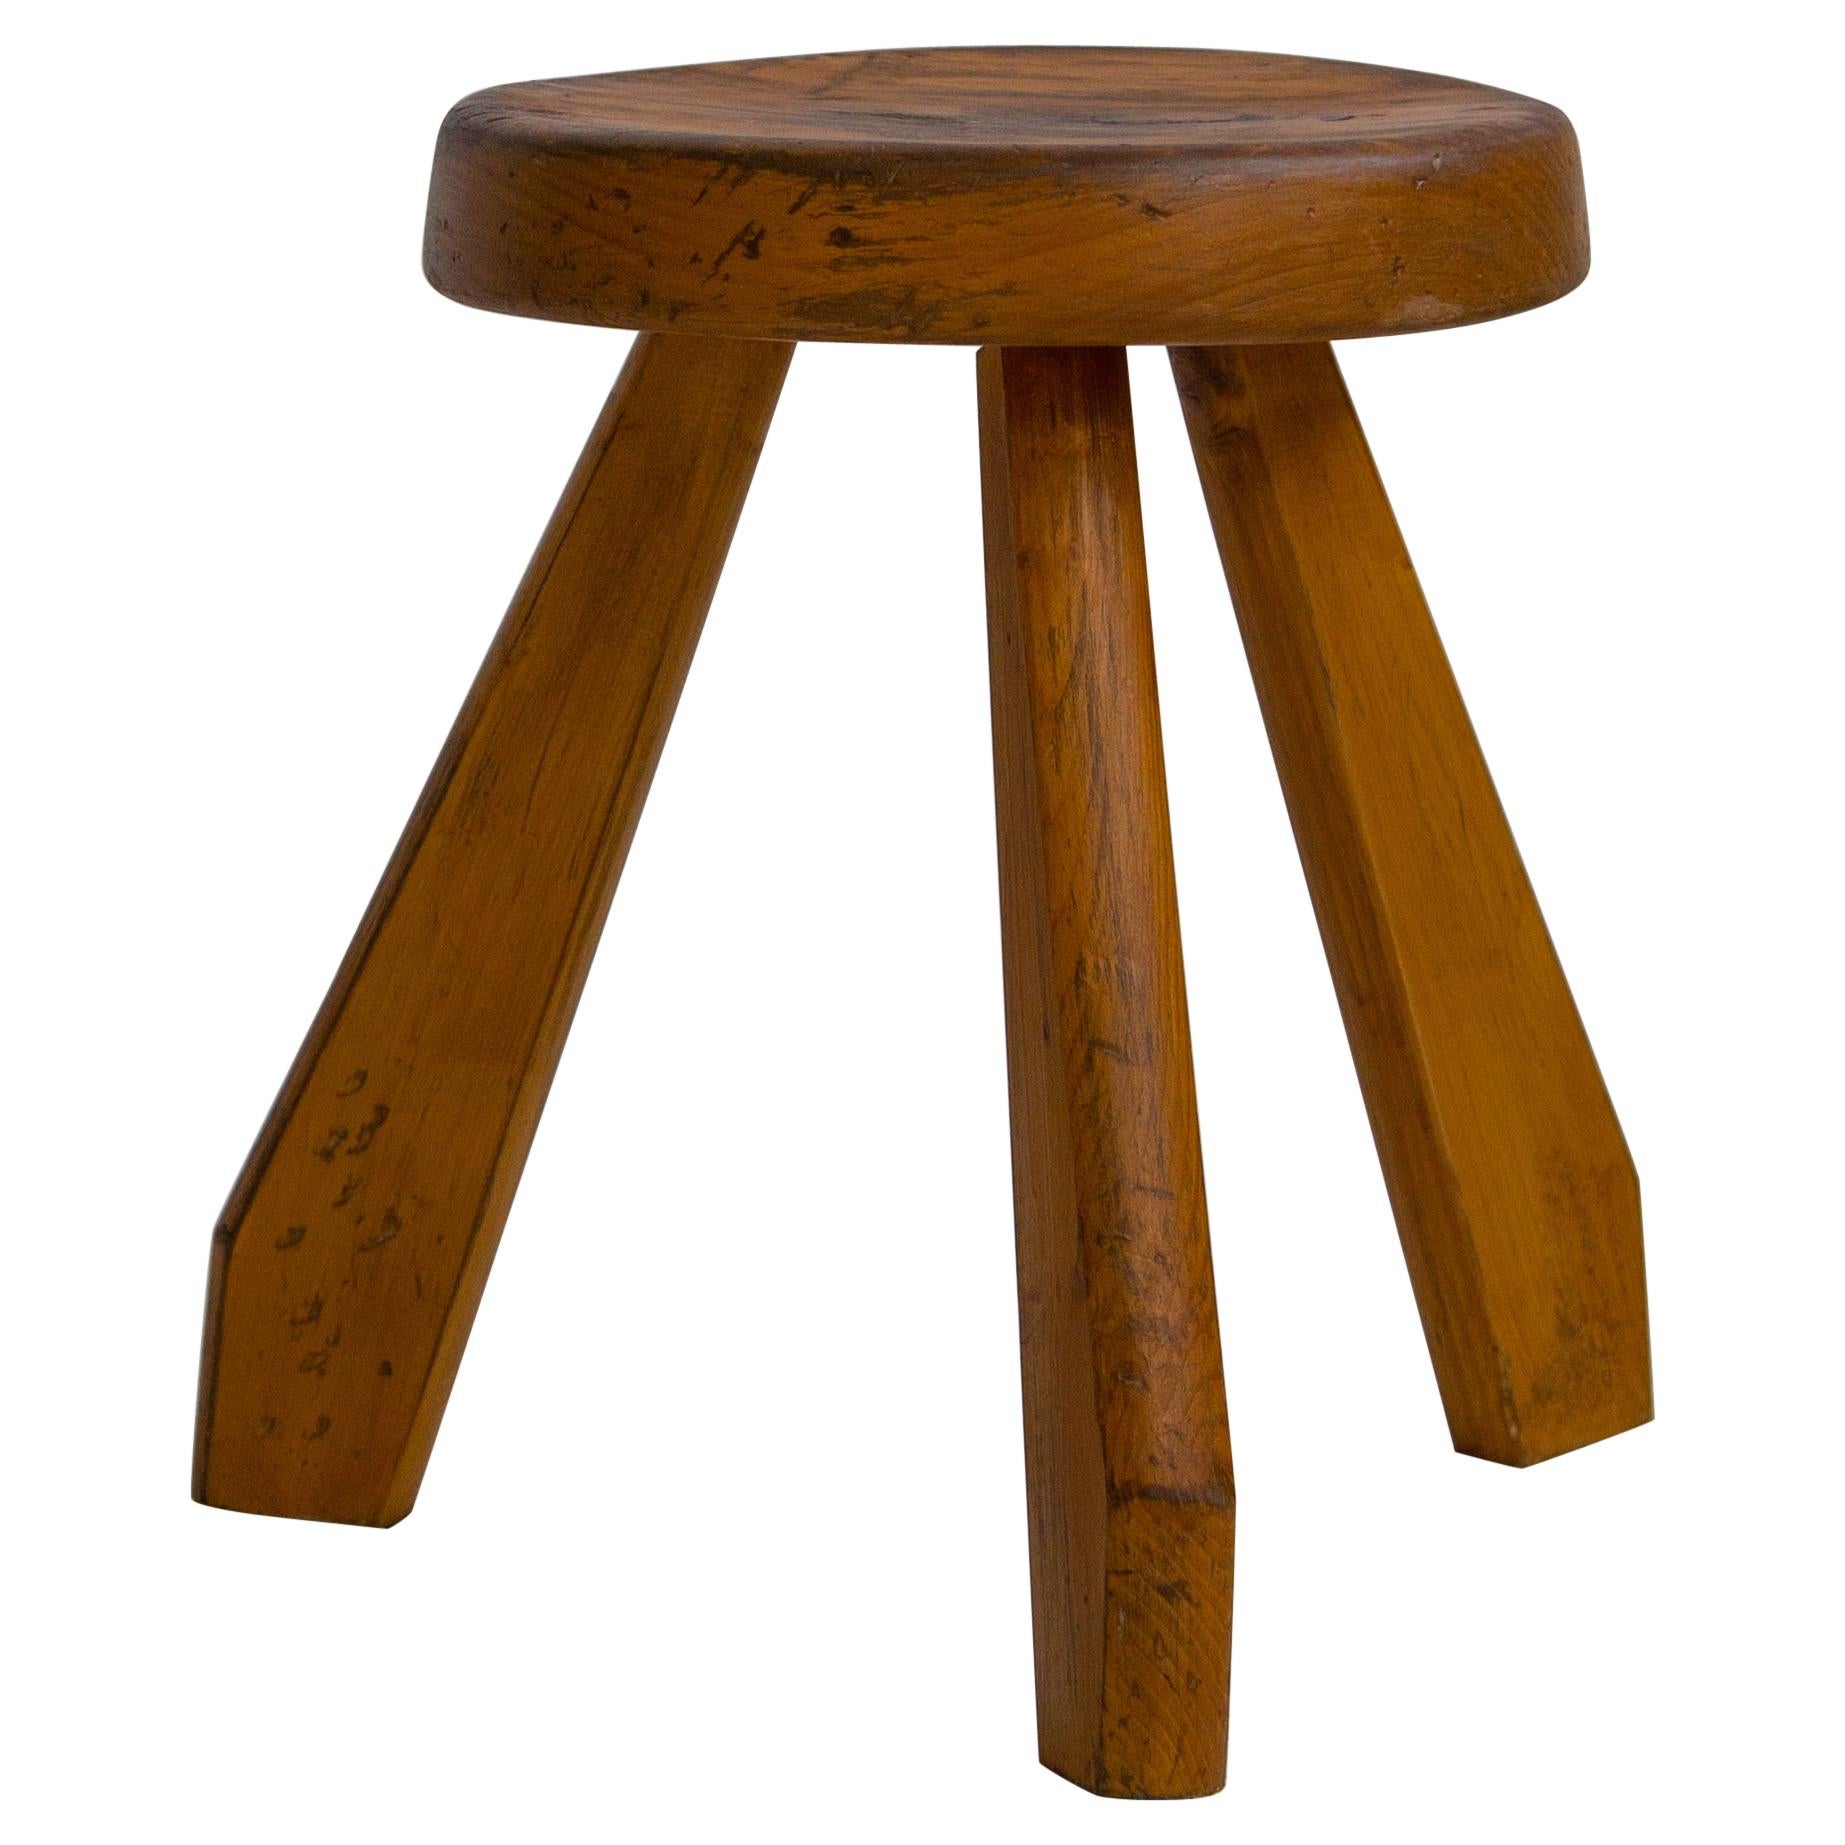 Vintage Charlotte Perriand Round Light Pine Stool for Les Arcs, 1960s, France For Sale